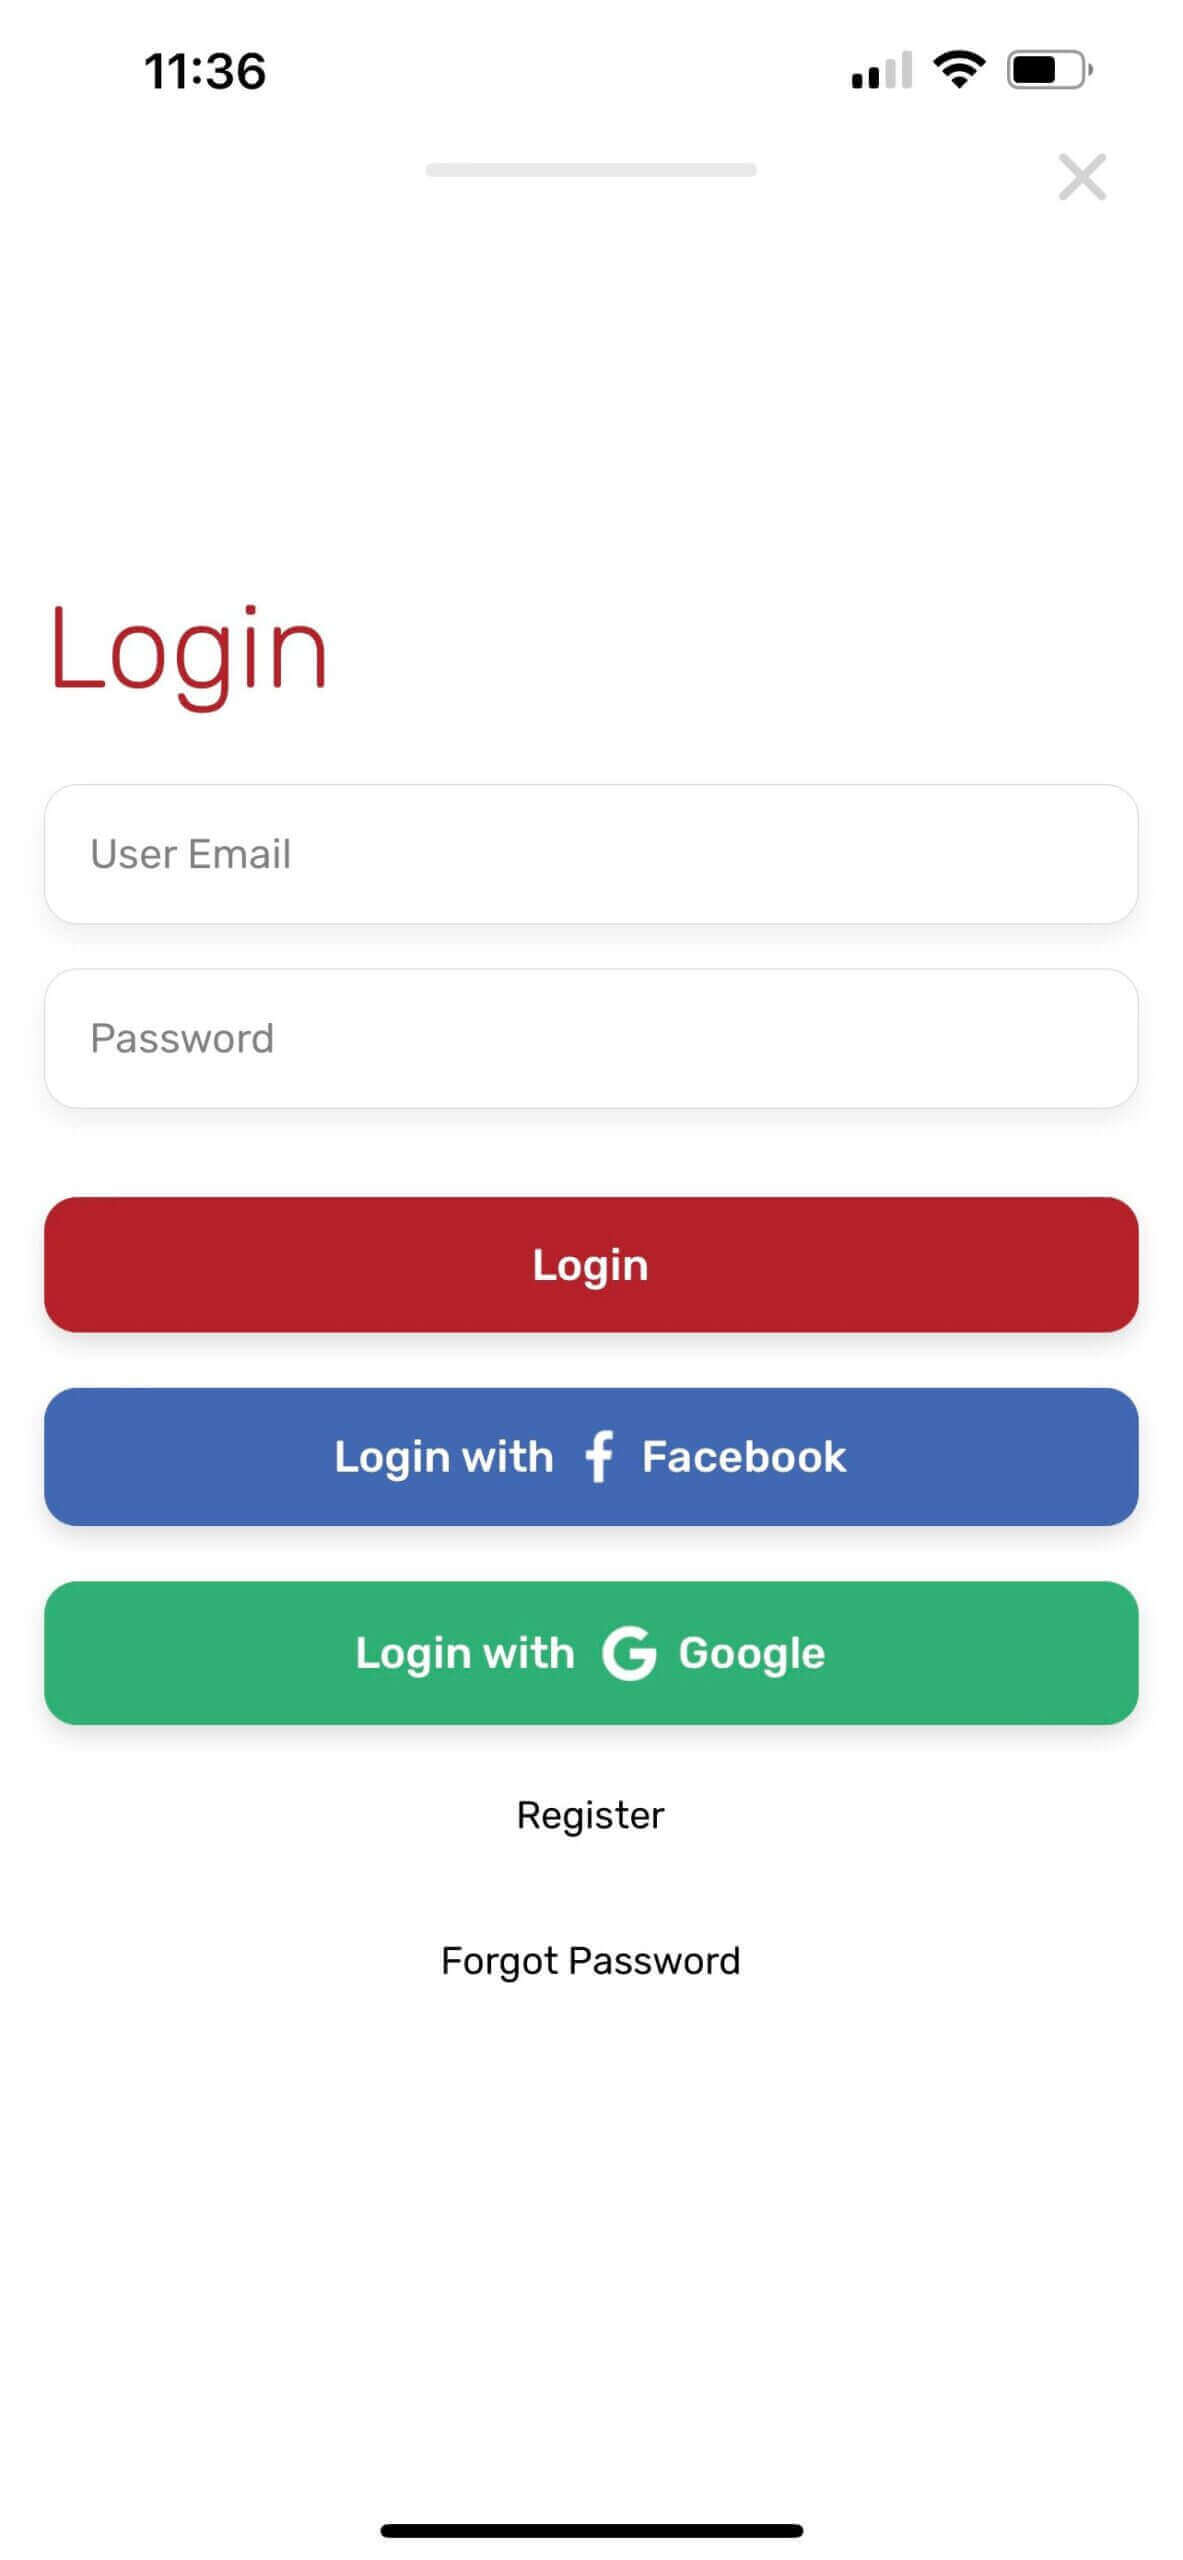 Login page for the Casas app